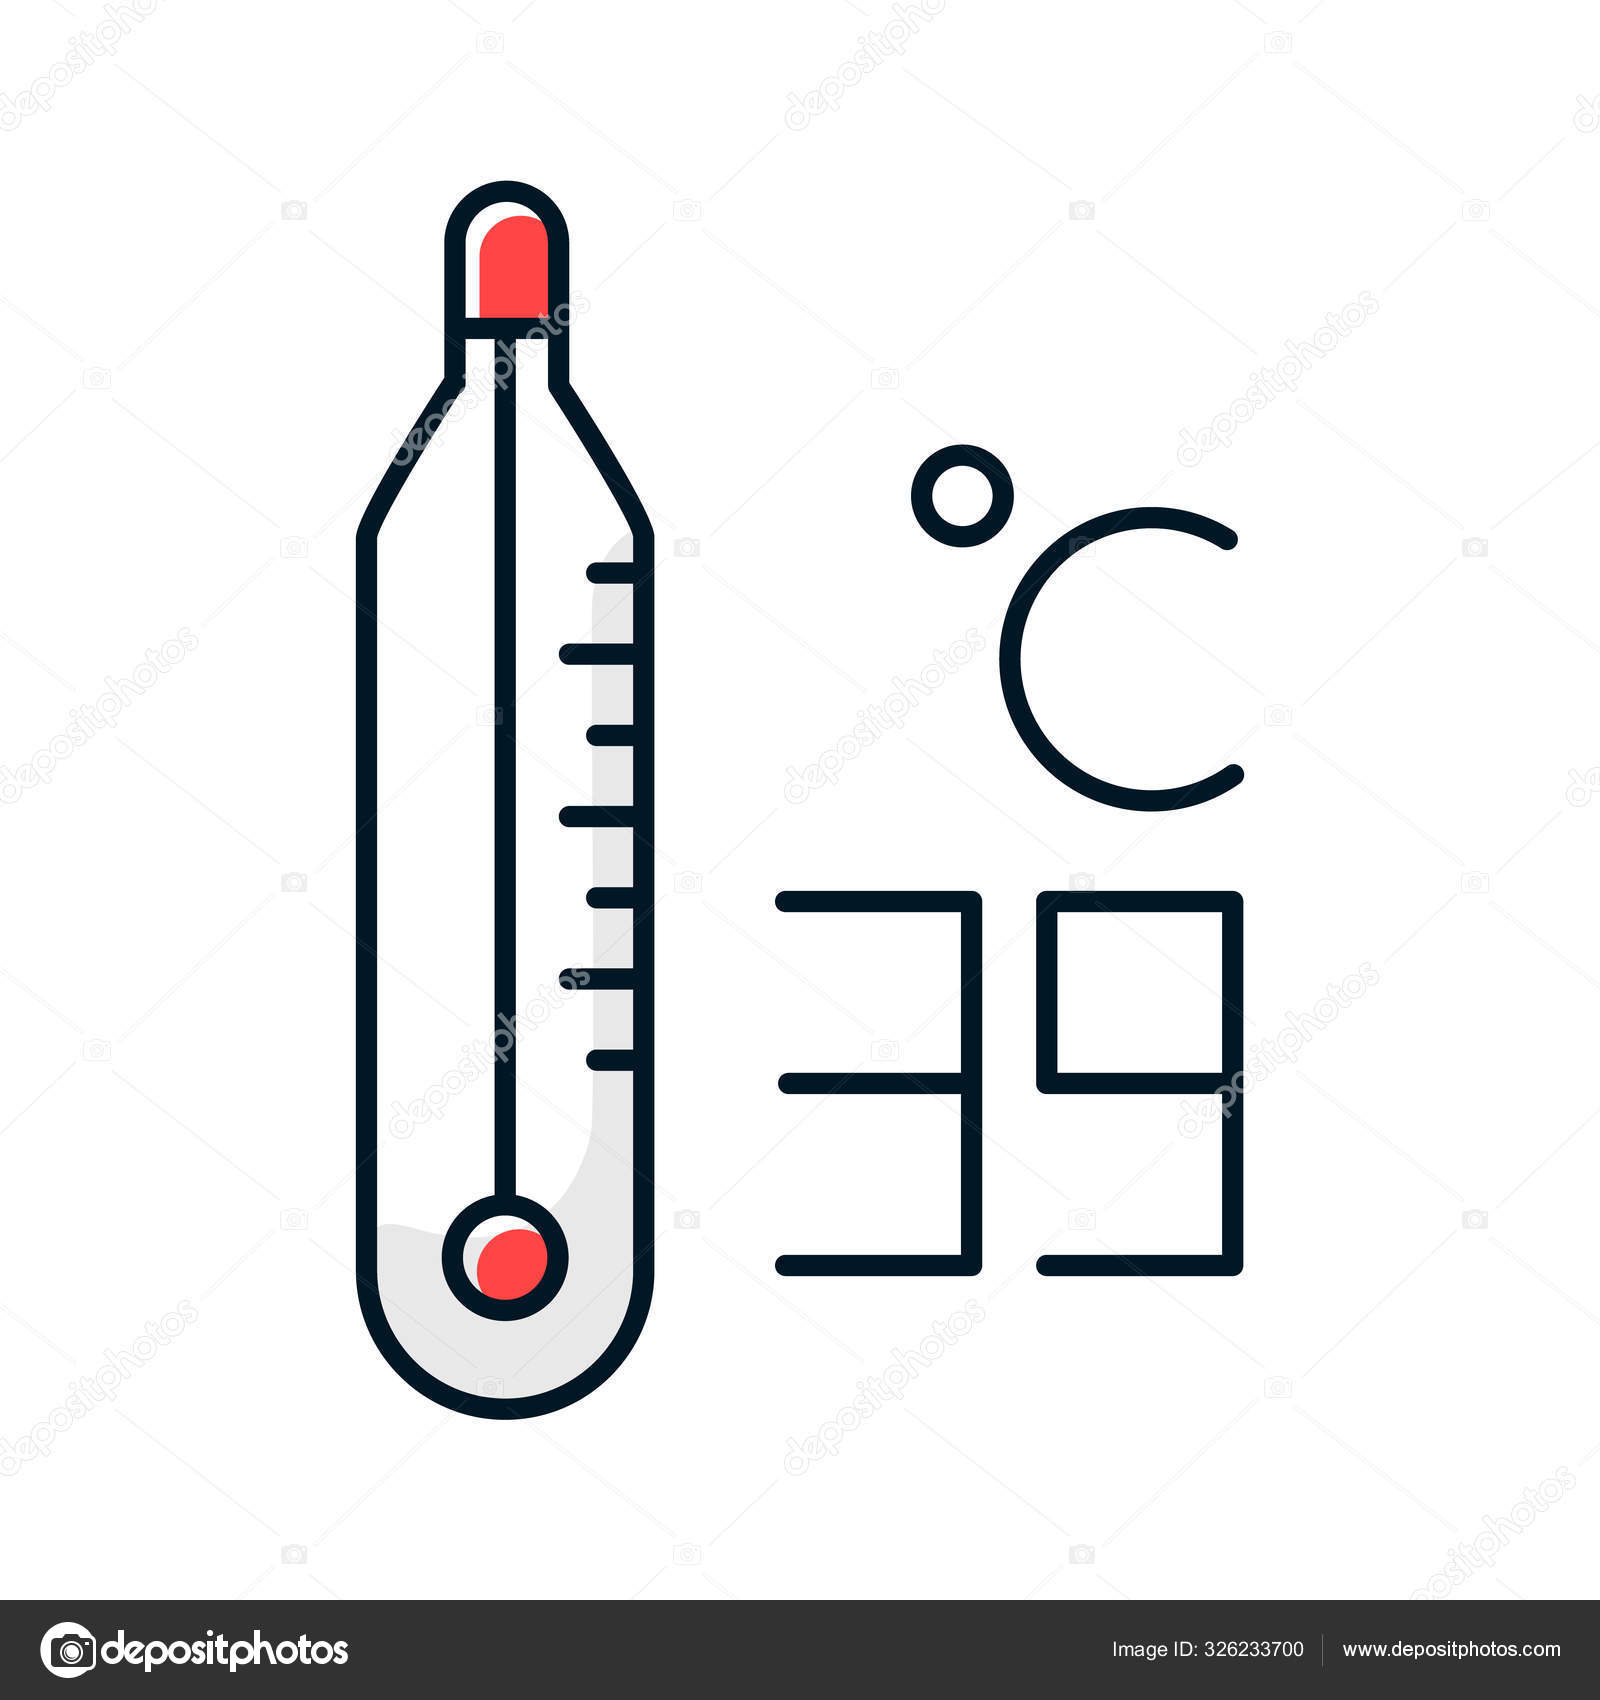 Thermometer with high temperature isolated icon Vector Image